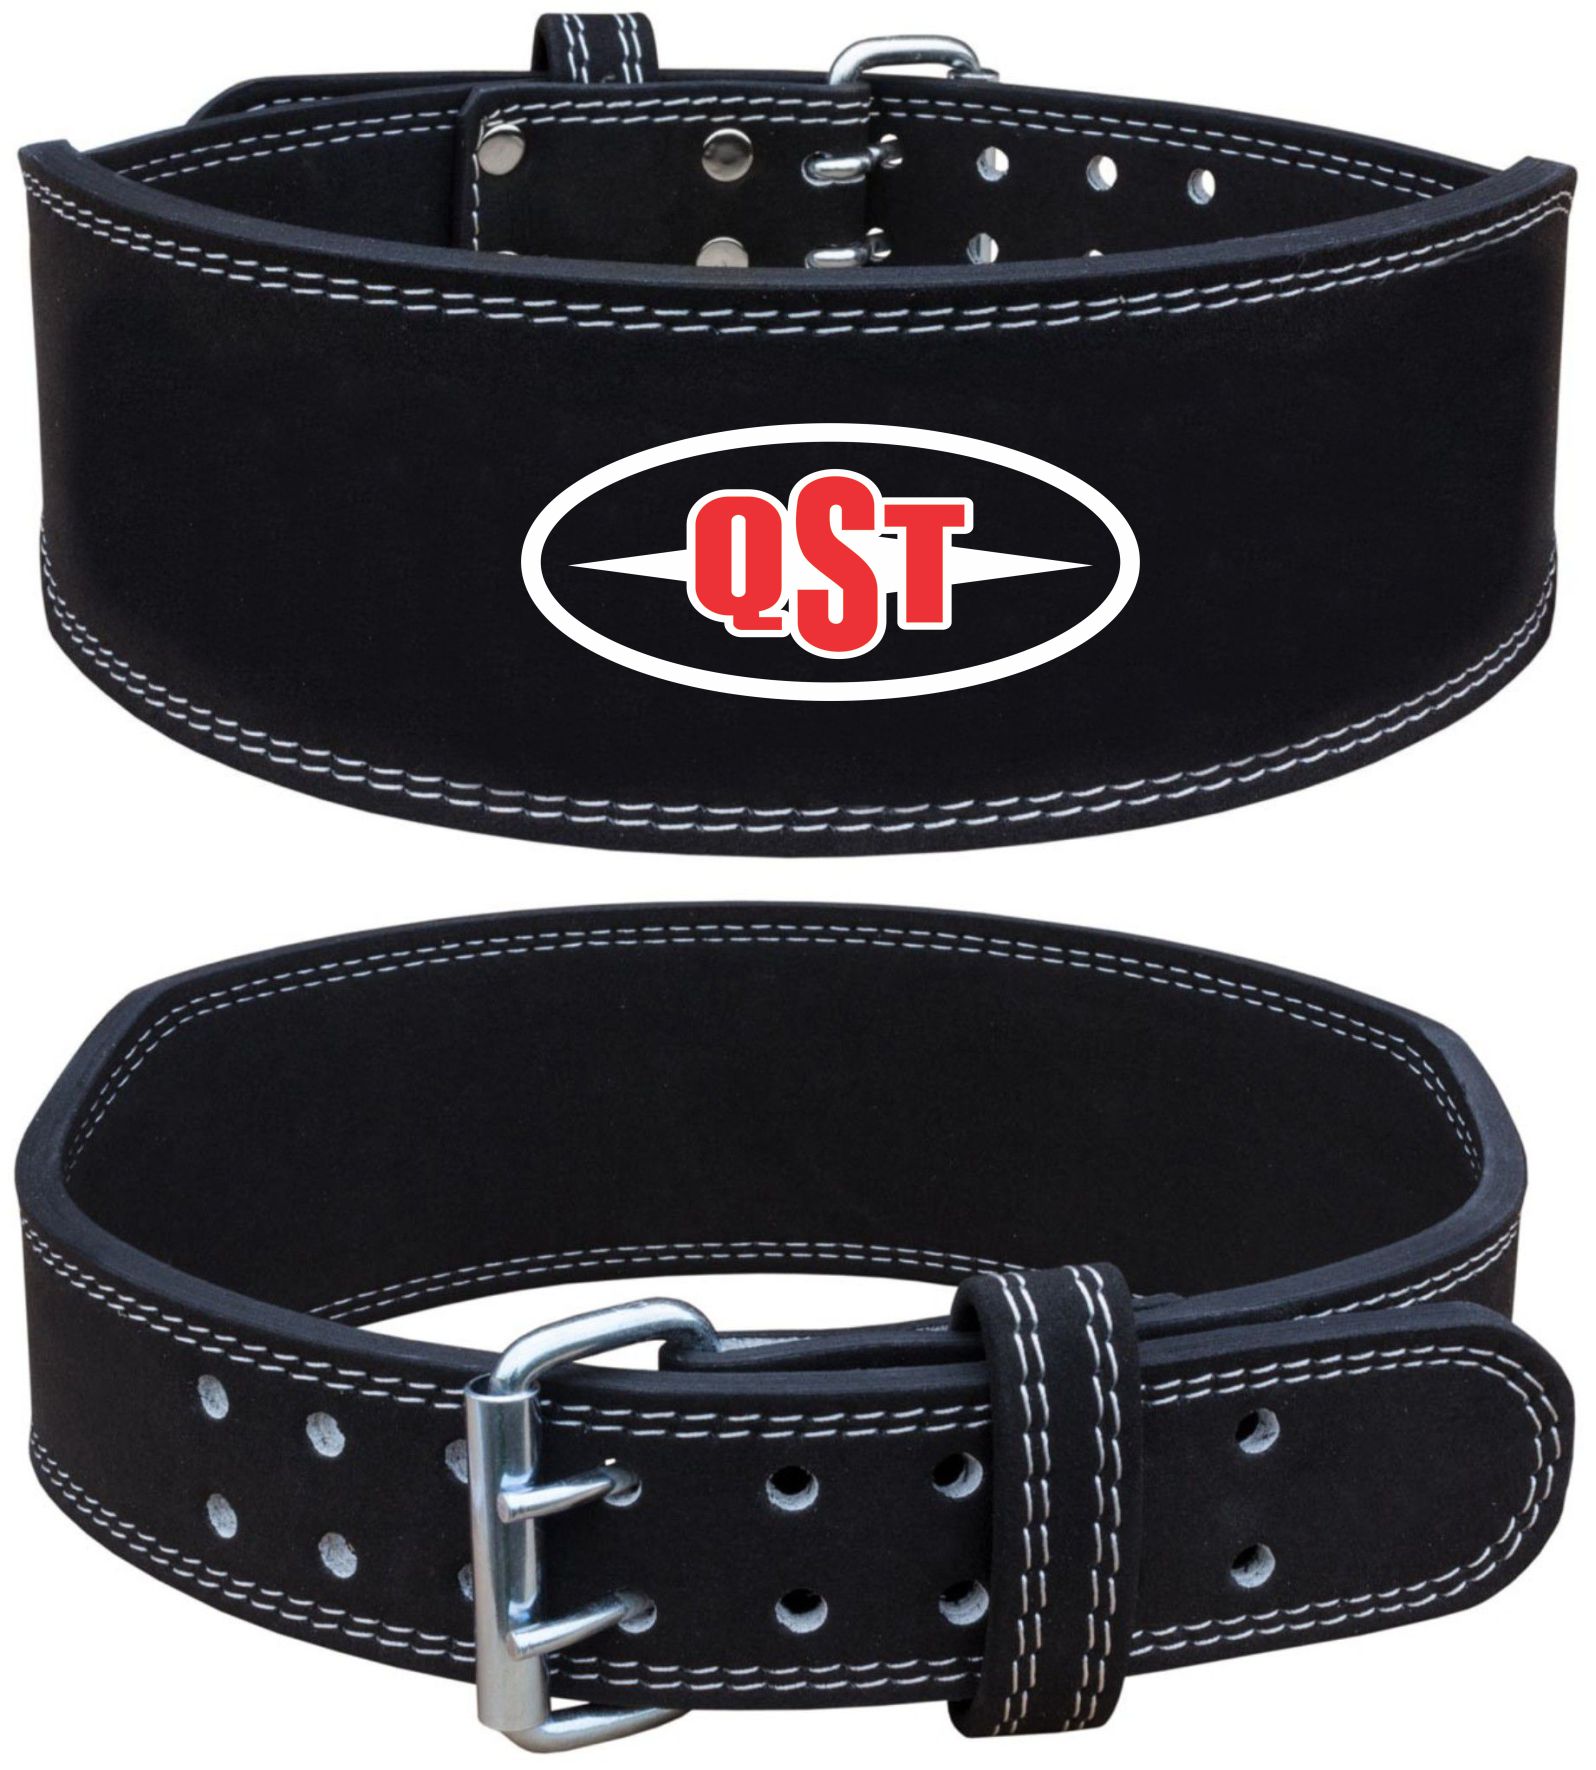 Leather Weightlifting Belt - ACS-1544